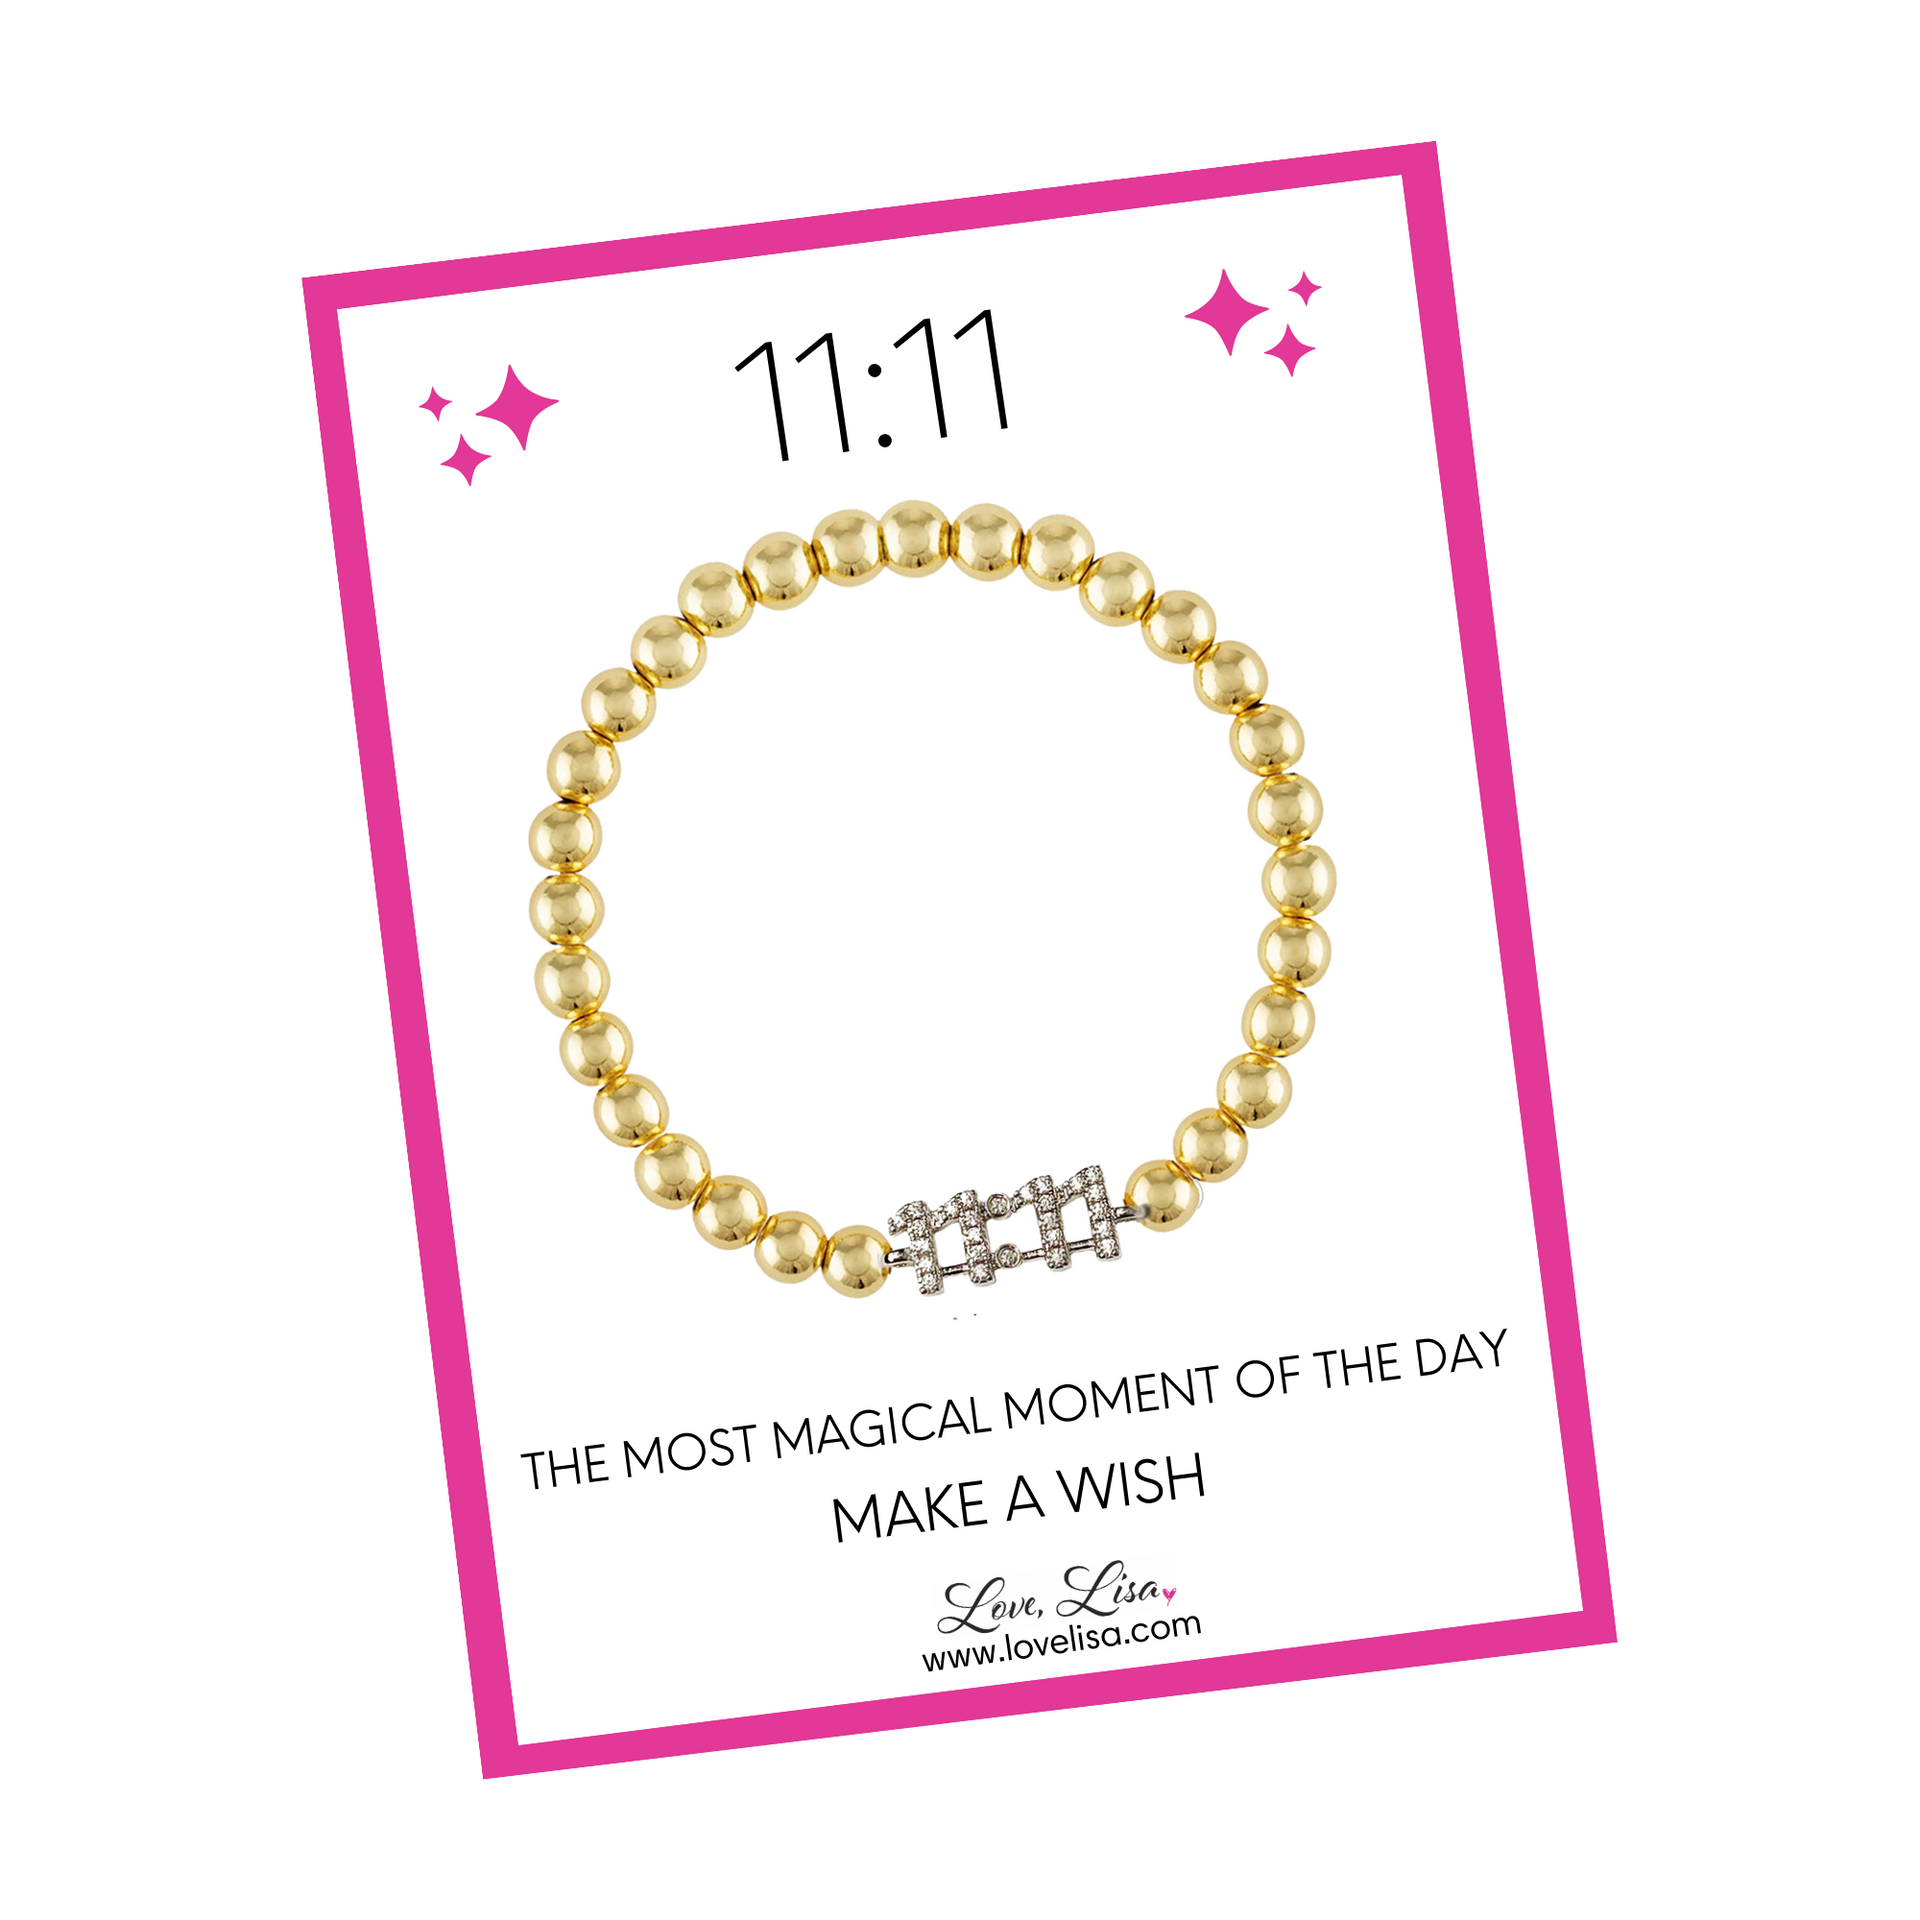 Inspirational Gifts for Women - 11:11 Gift Ideas for Her - 11:11